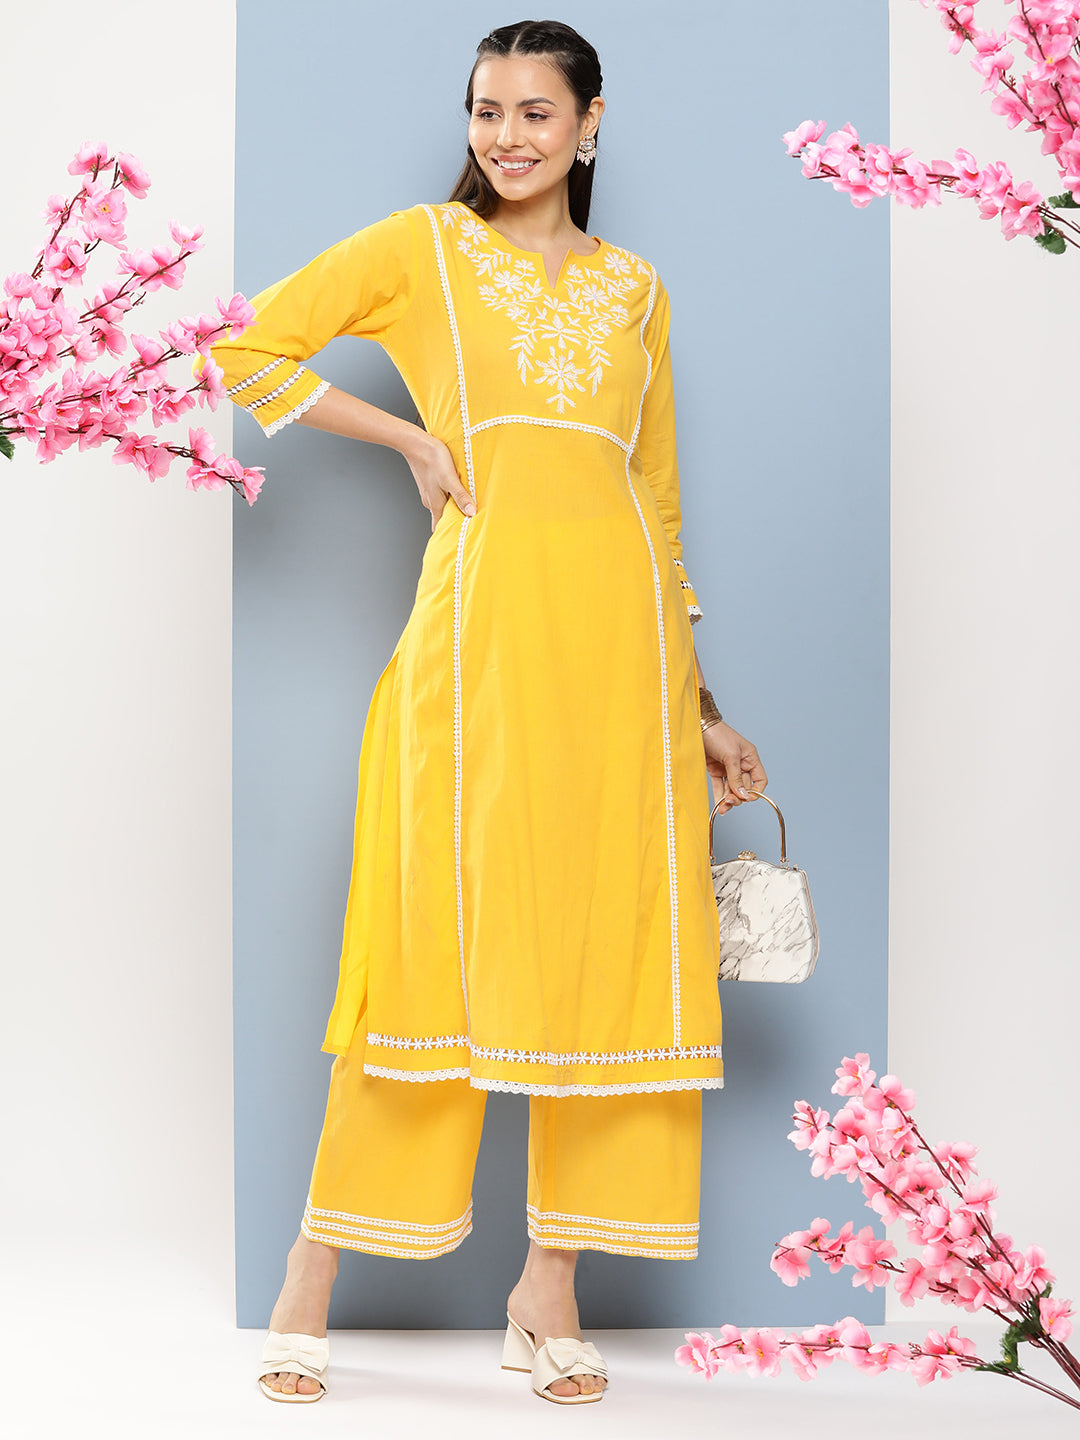 Women's Yellow Yoke Design Kurta With Lace Details & Yellow Solid Lace Details Palazzos - Bhama Couture